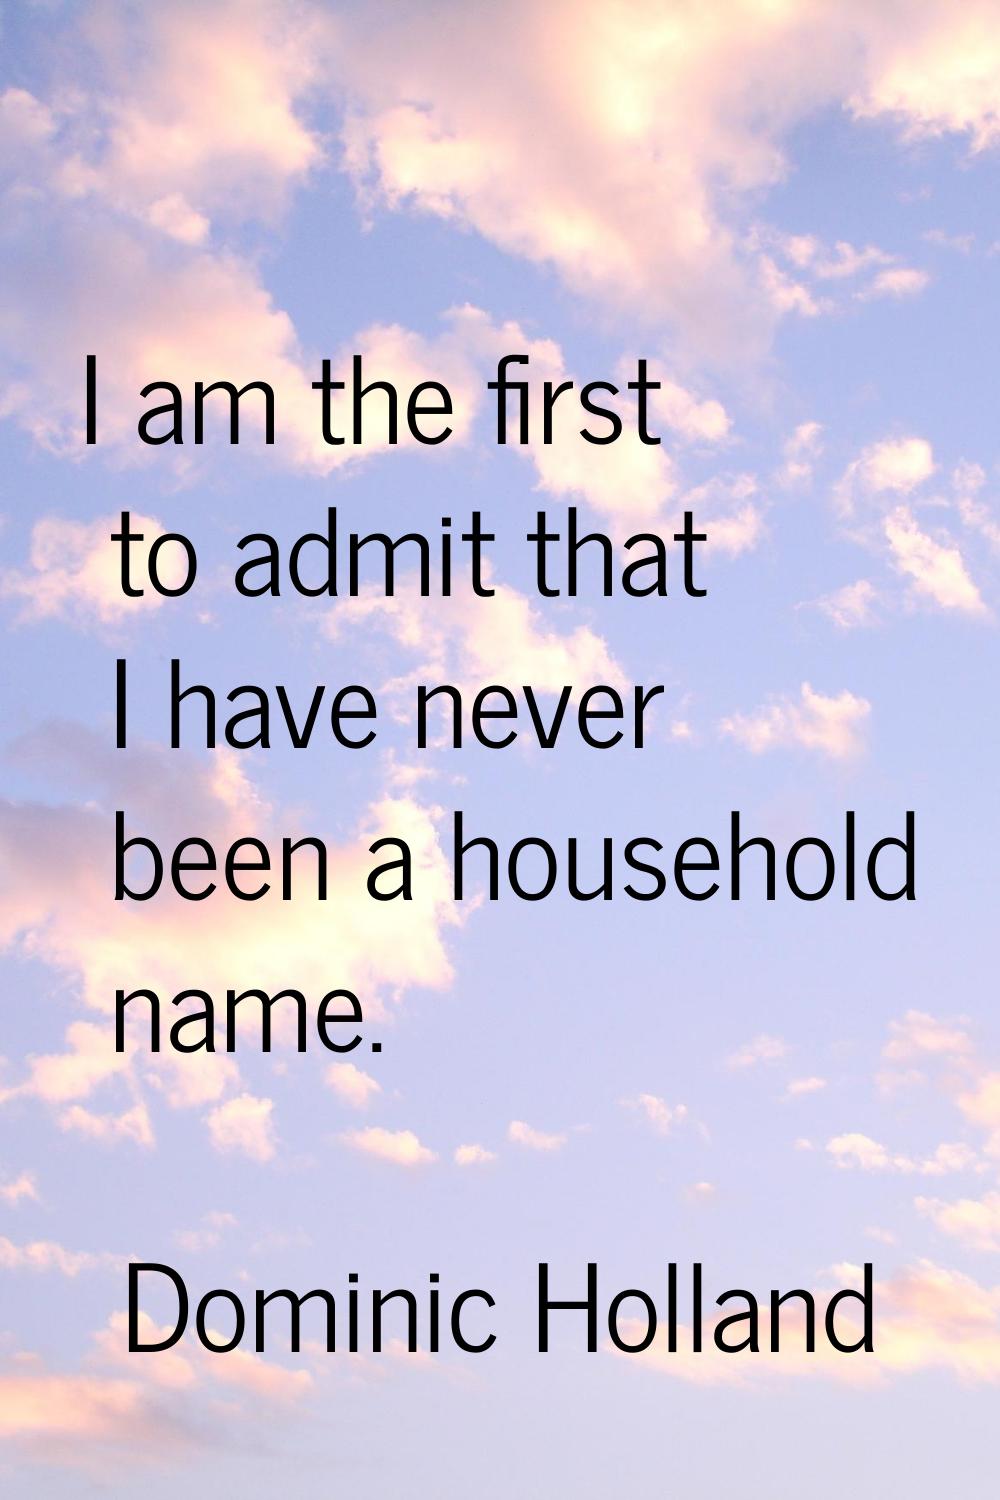 I am the first to admit that I have never been a household name.